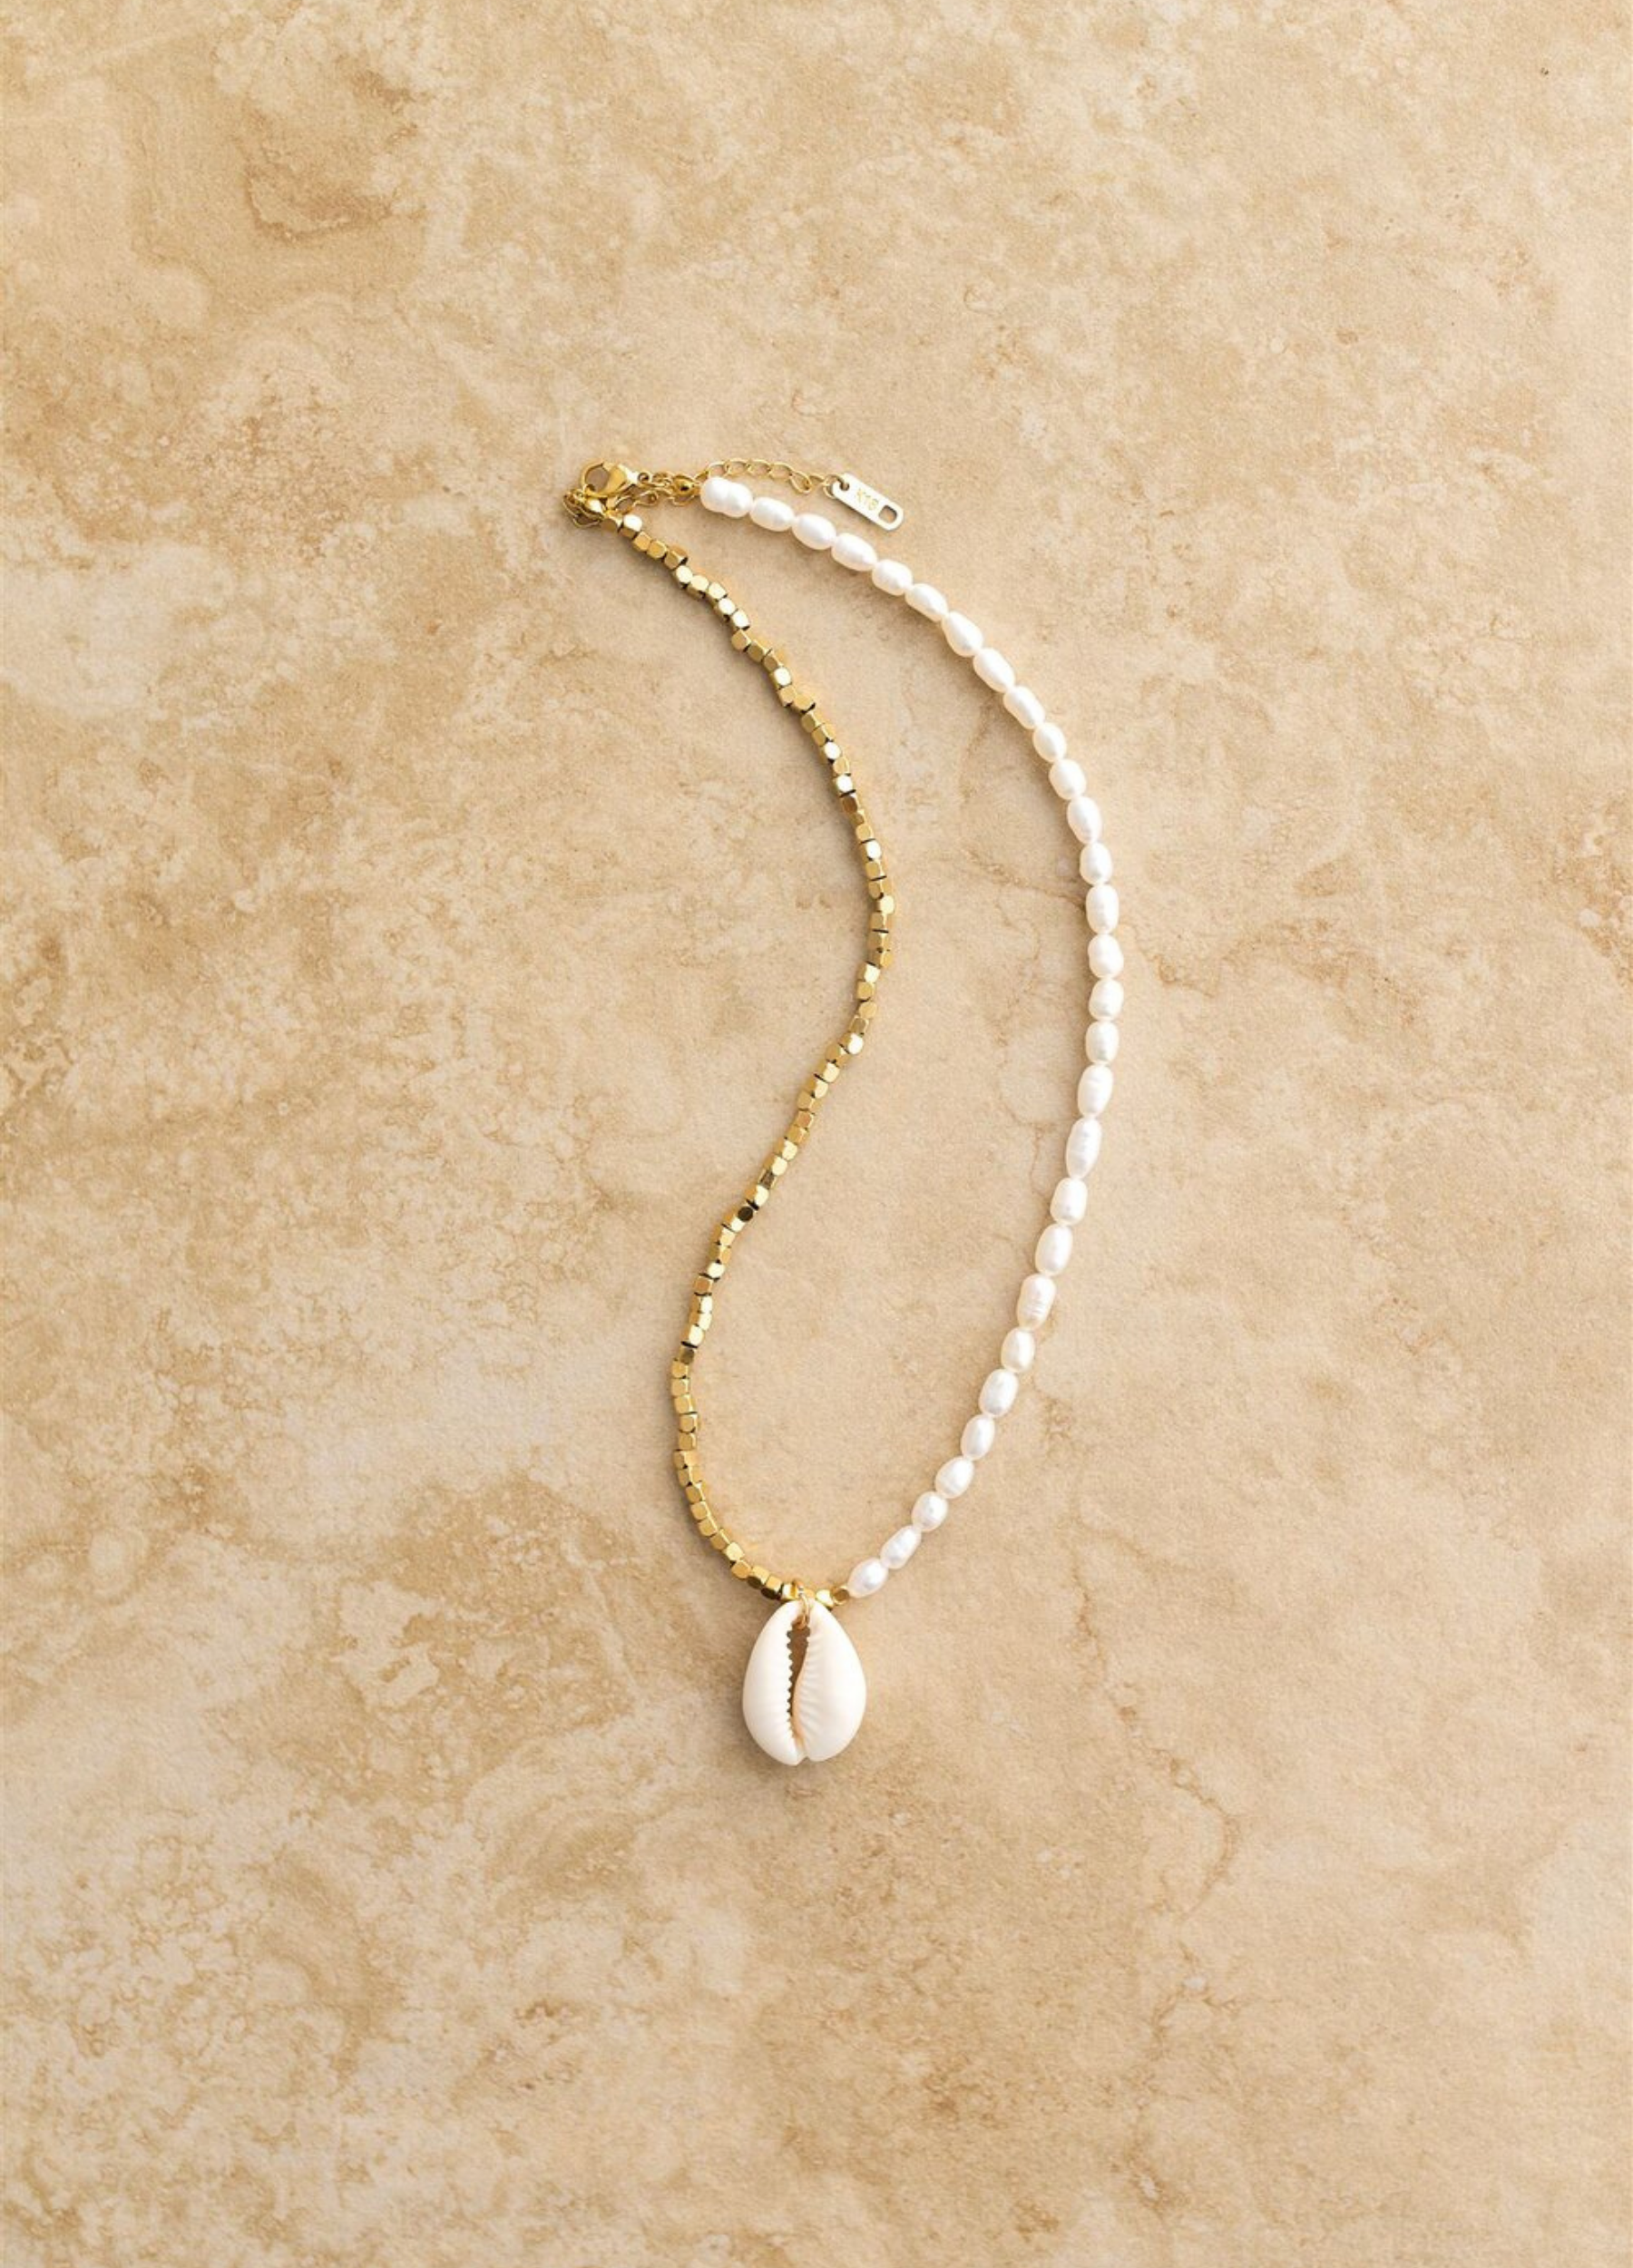 The Moana necklace from Indigo & Wolfe, shell, gold and freshwater pearls